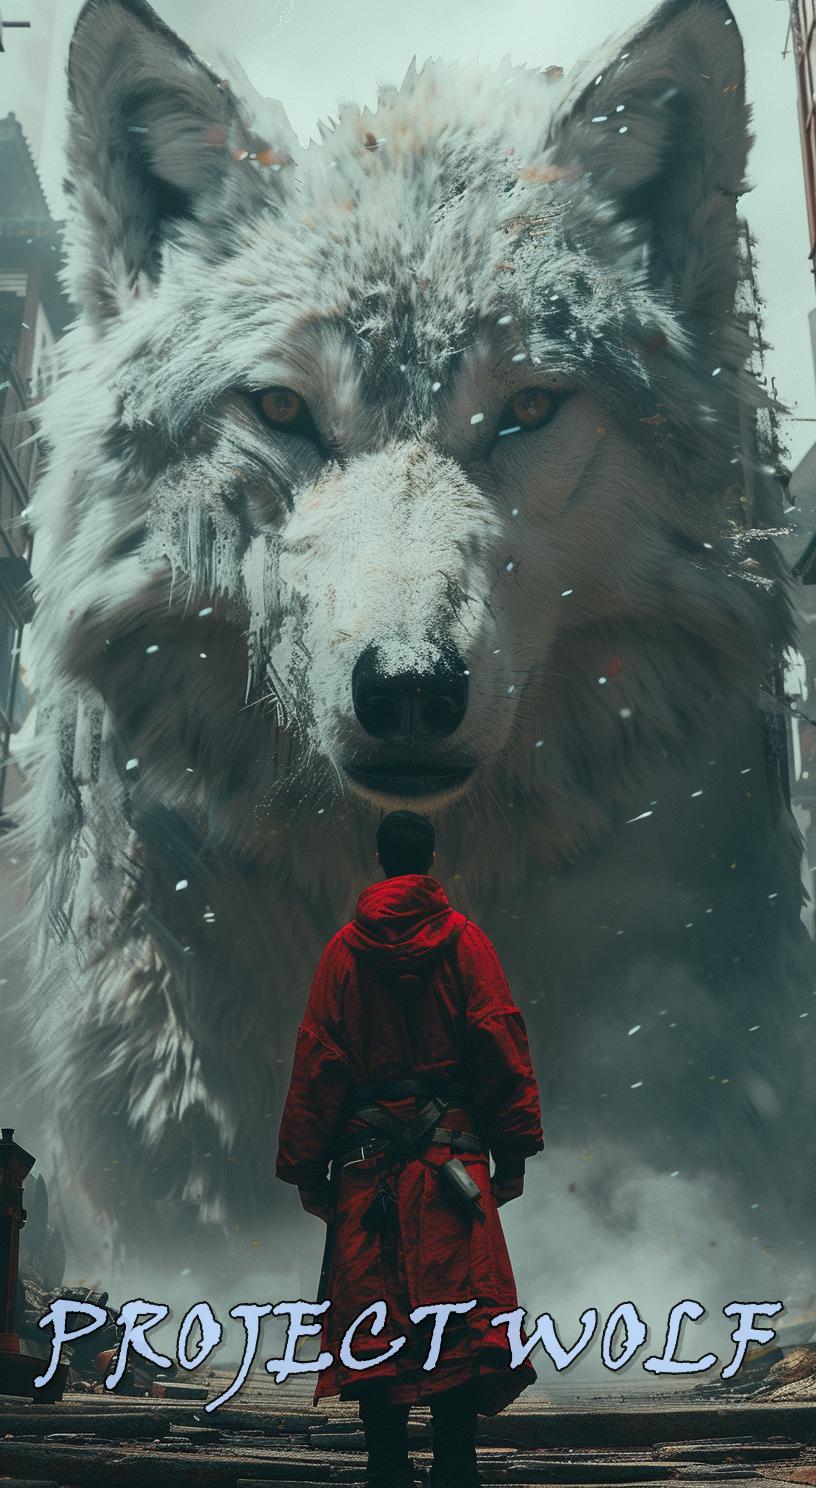 storm2day_the_man_stands_in_front_of_a_giant_statue_wolf_in_the_aeabdacb-510f-4129-9366-35b522803831.png.jpg